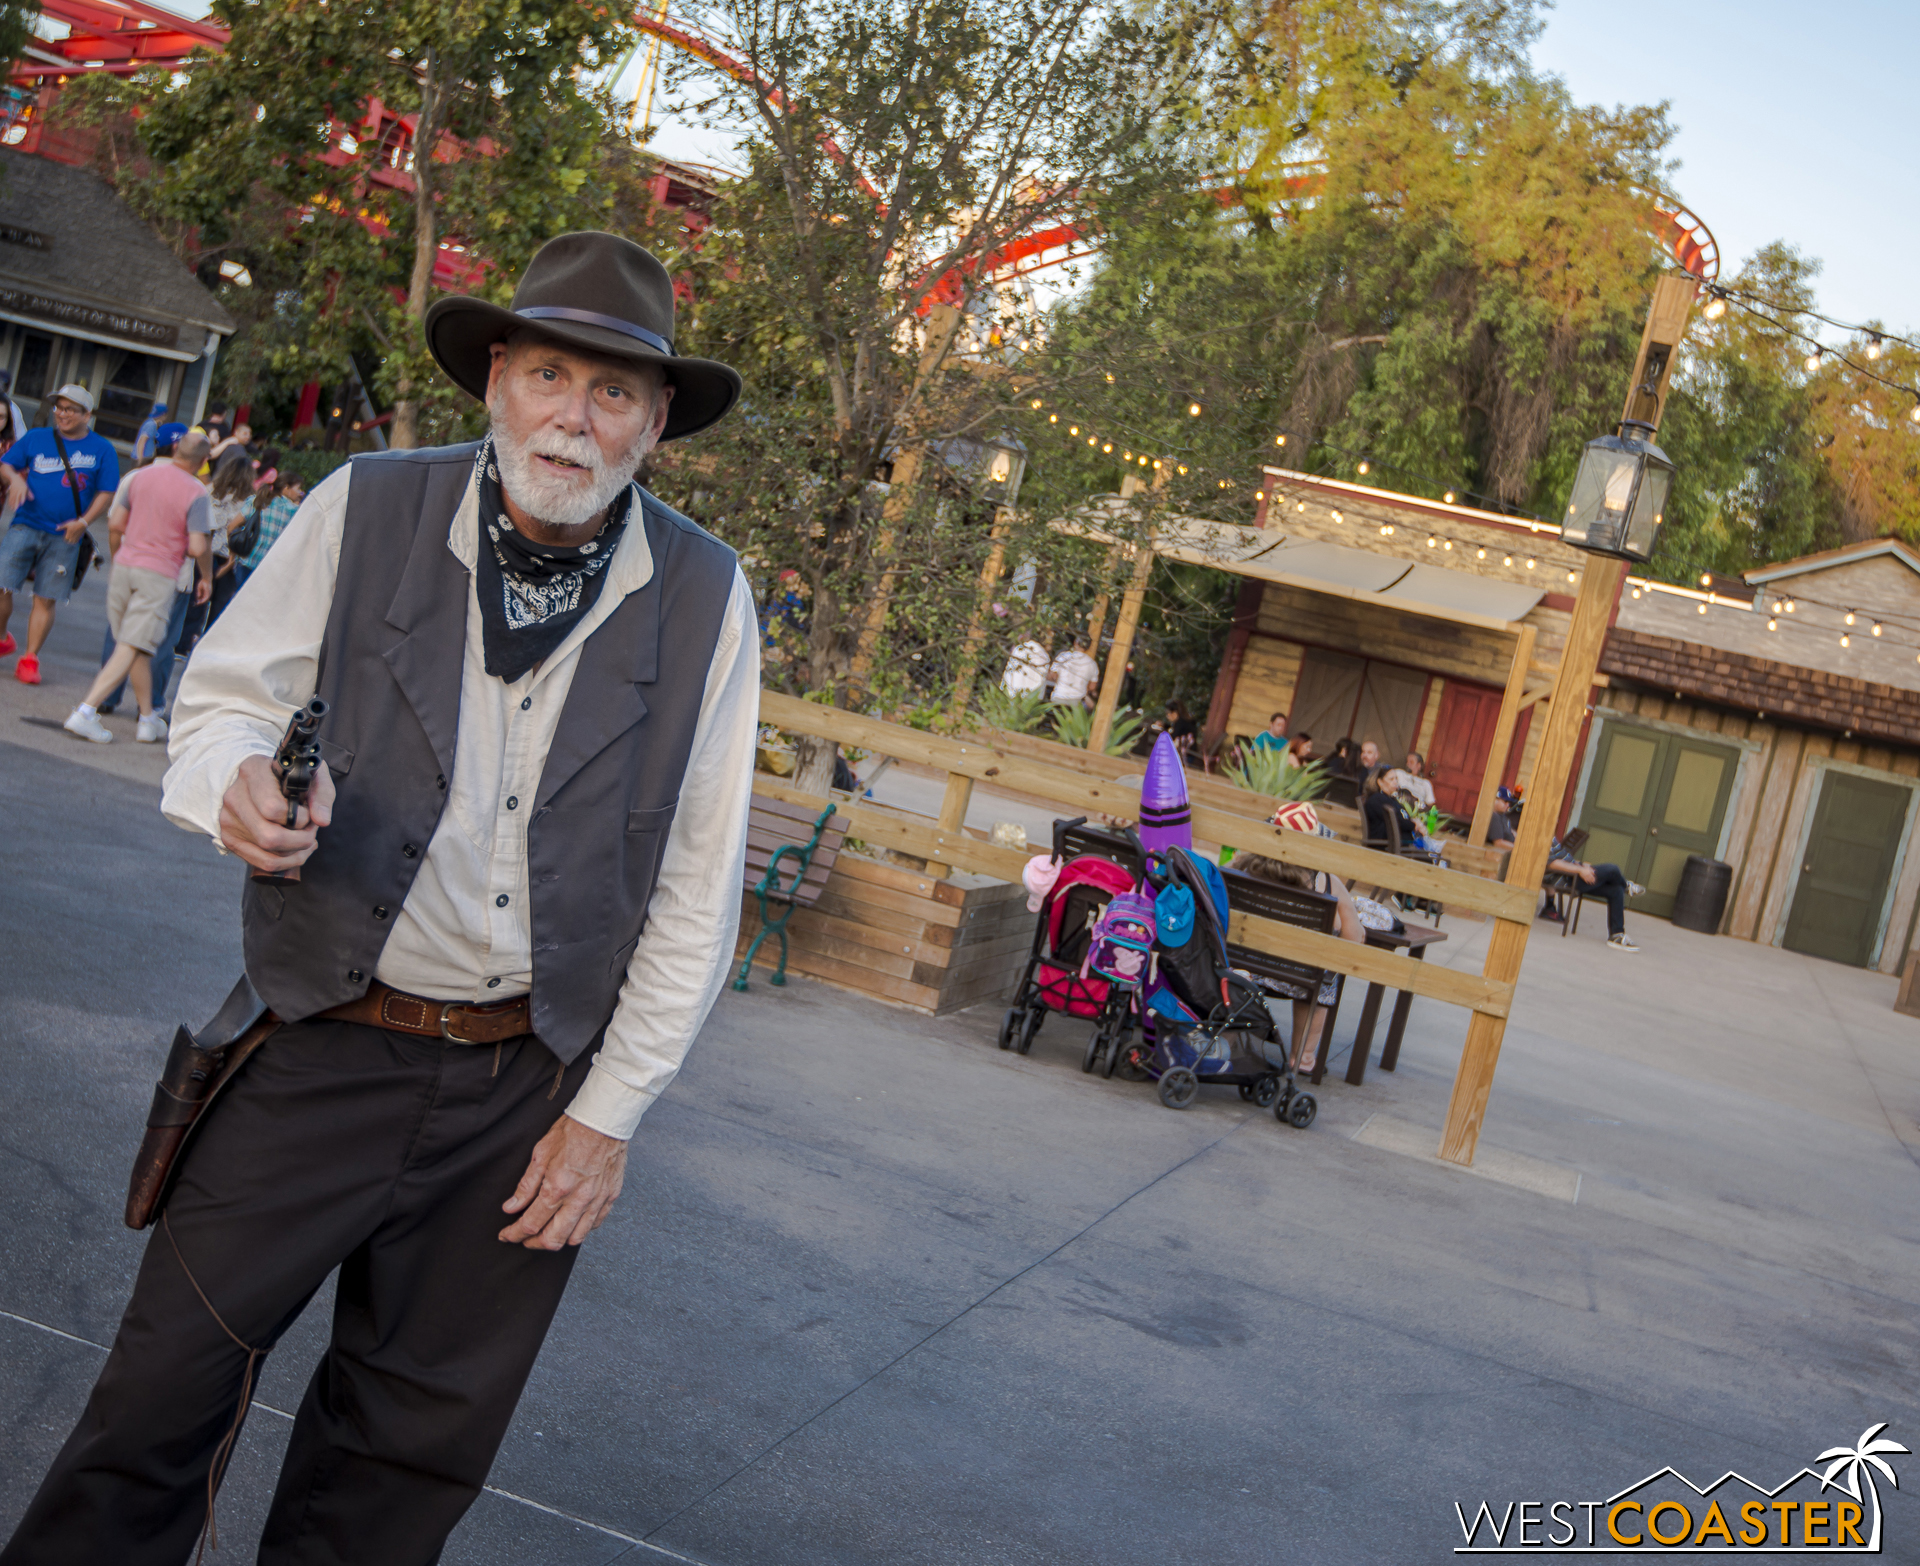  Here's a regular Ghost Town street character wandering Calico Square. 